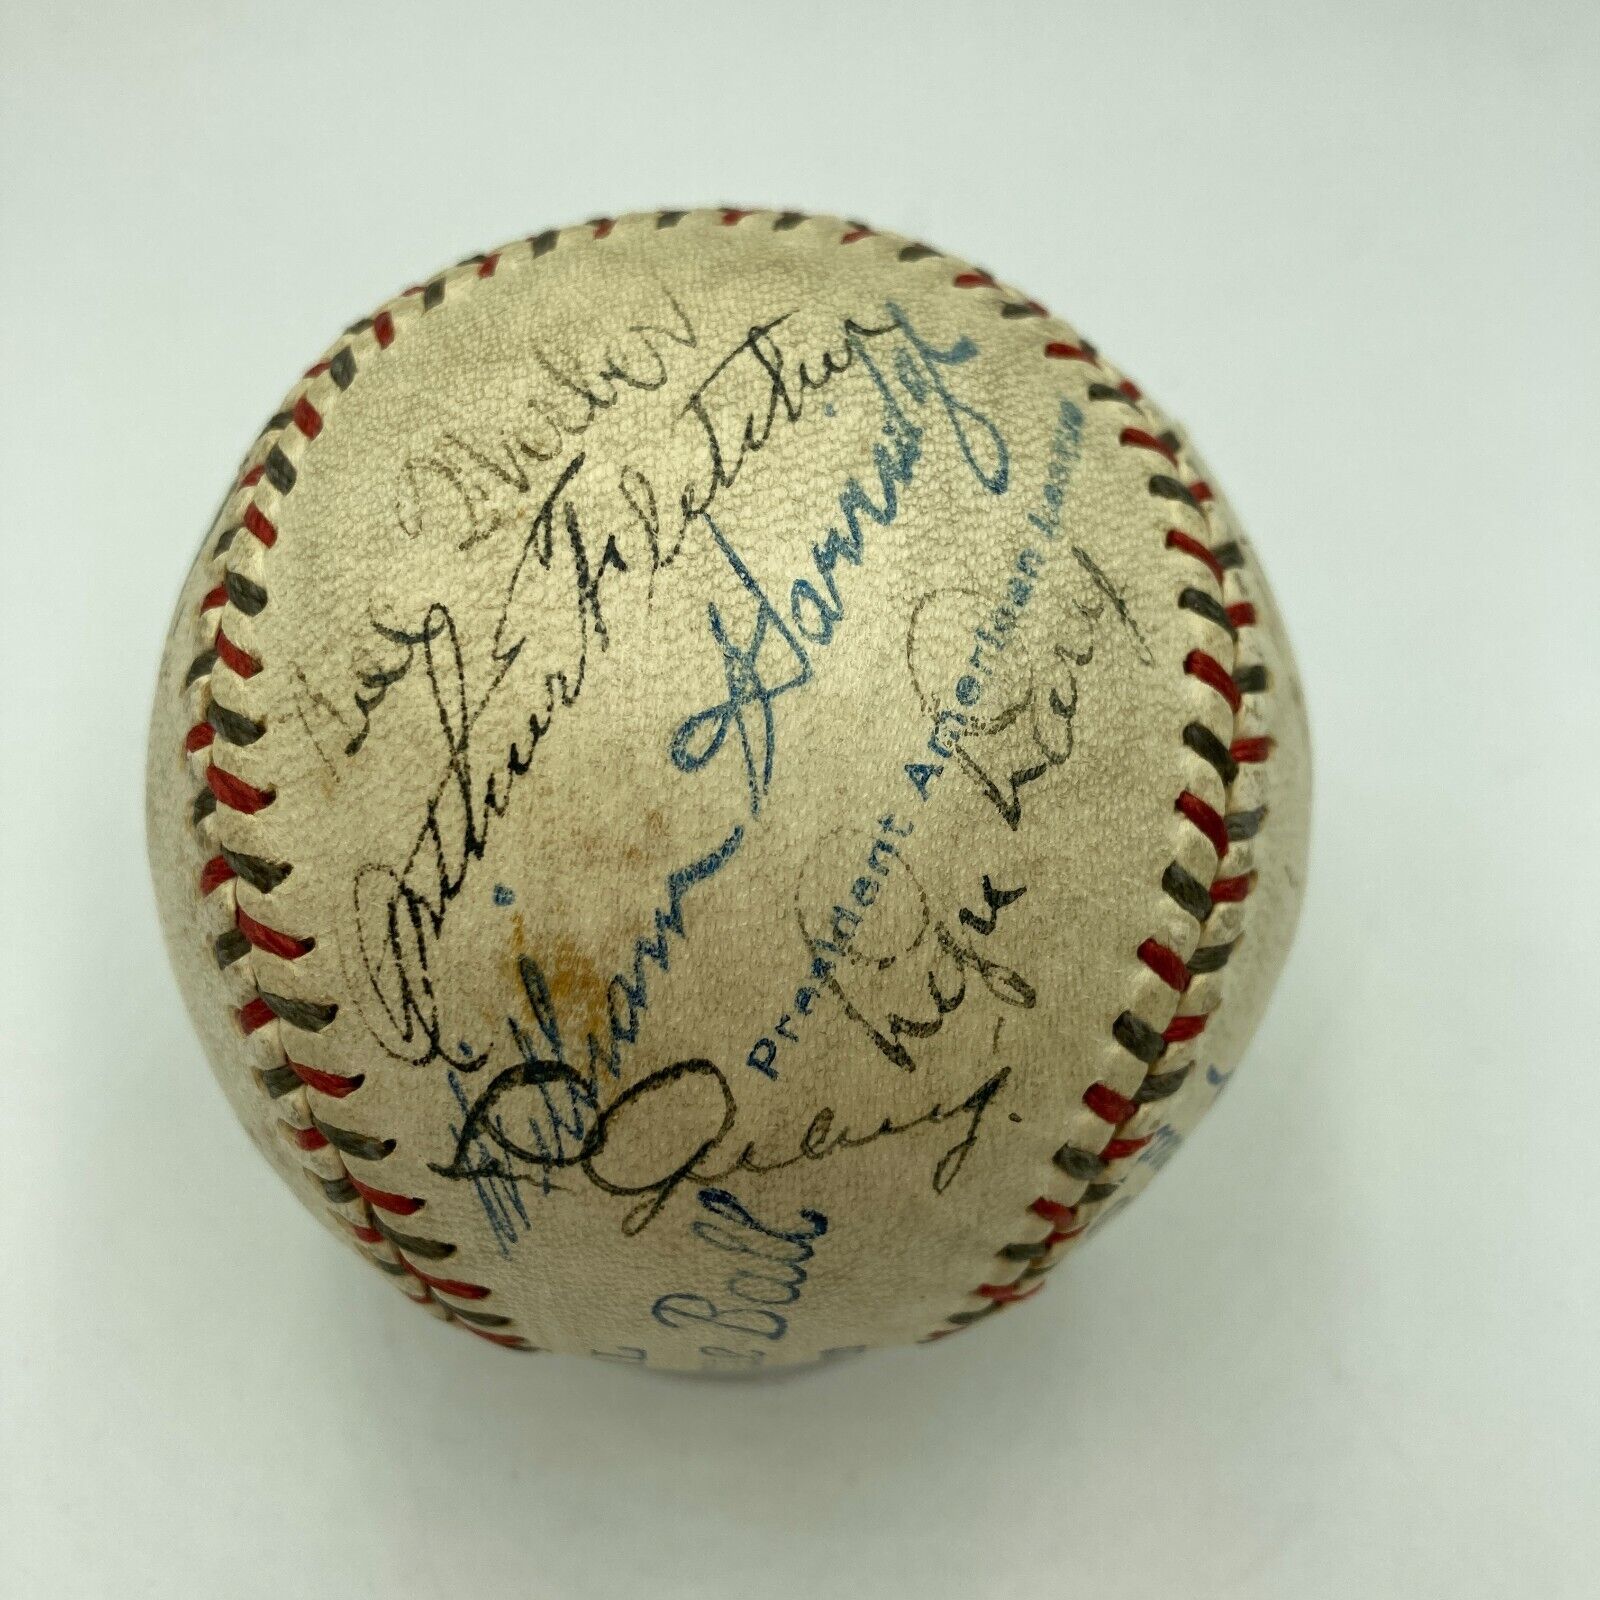 Babe Ruth & Lou Gehrig 1932 New York Yankees W.S. Champs Signed Baseball PSA DNA